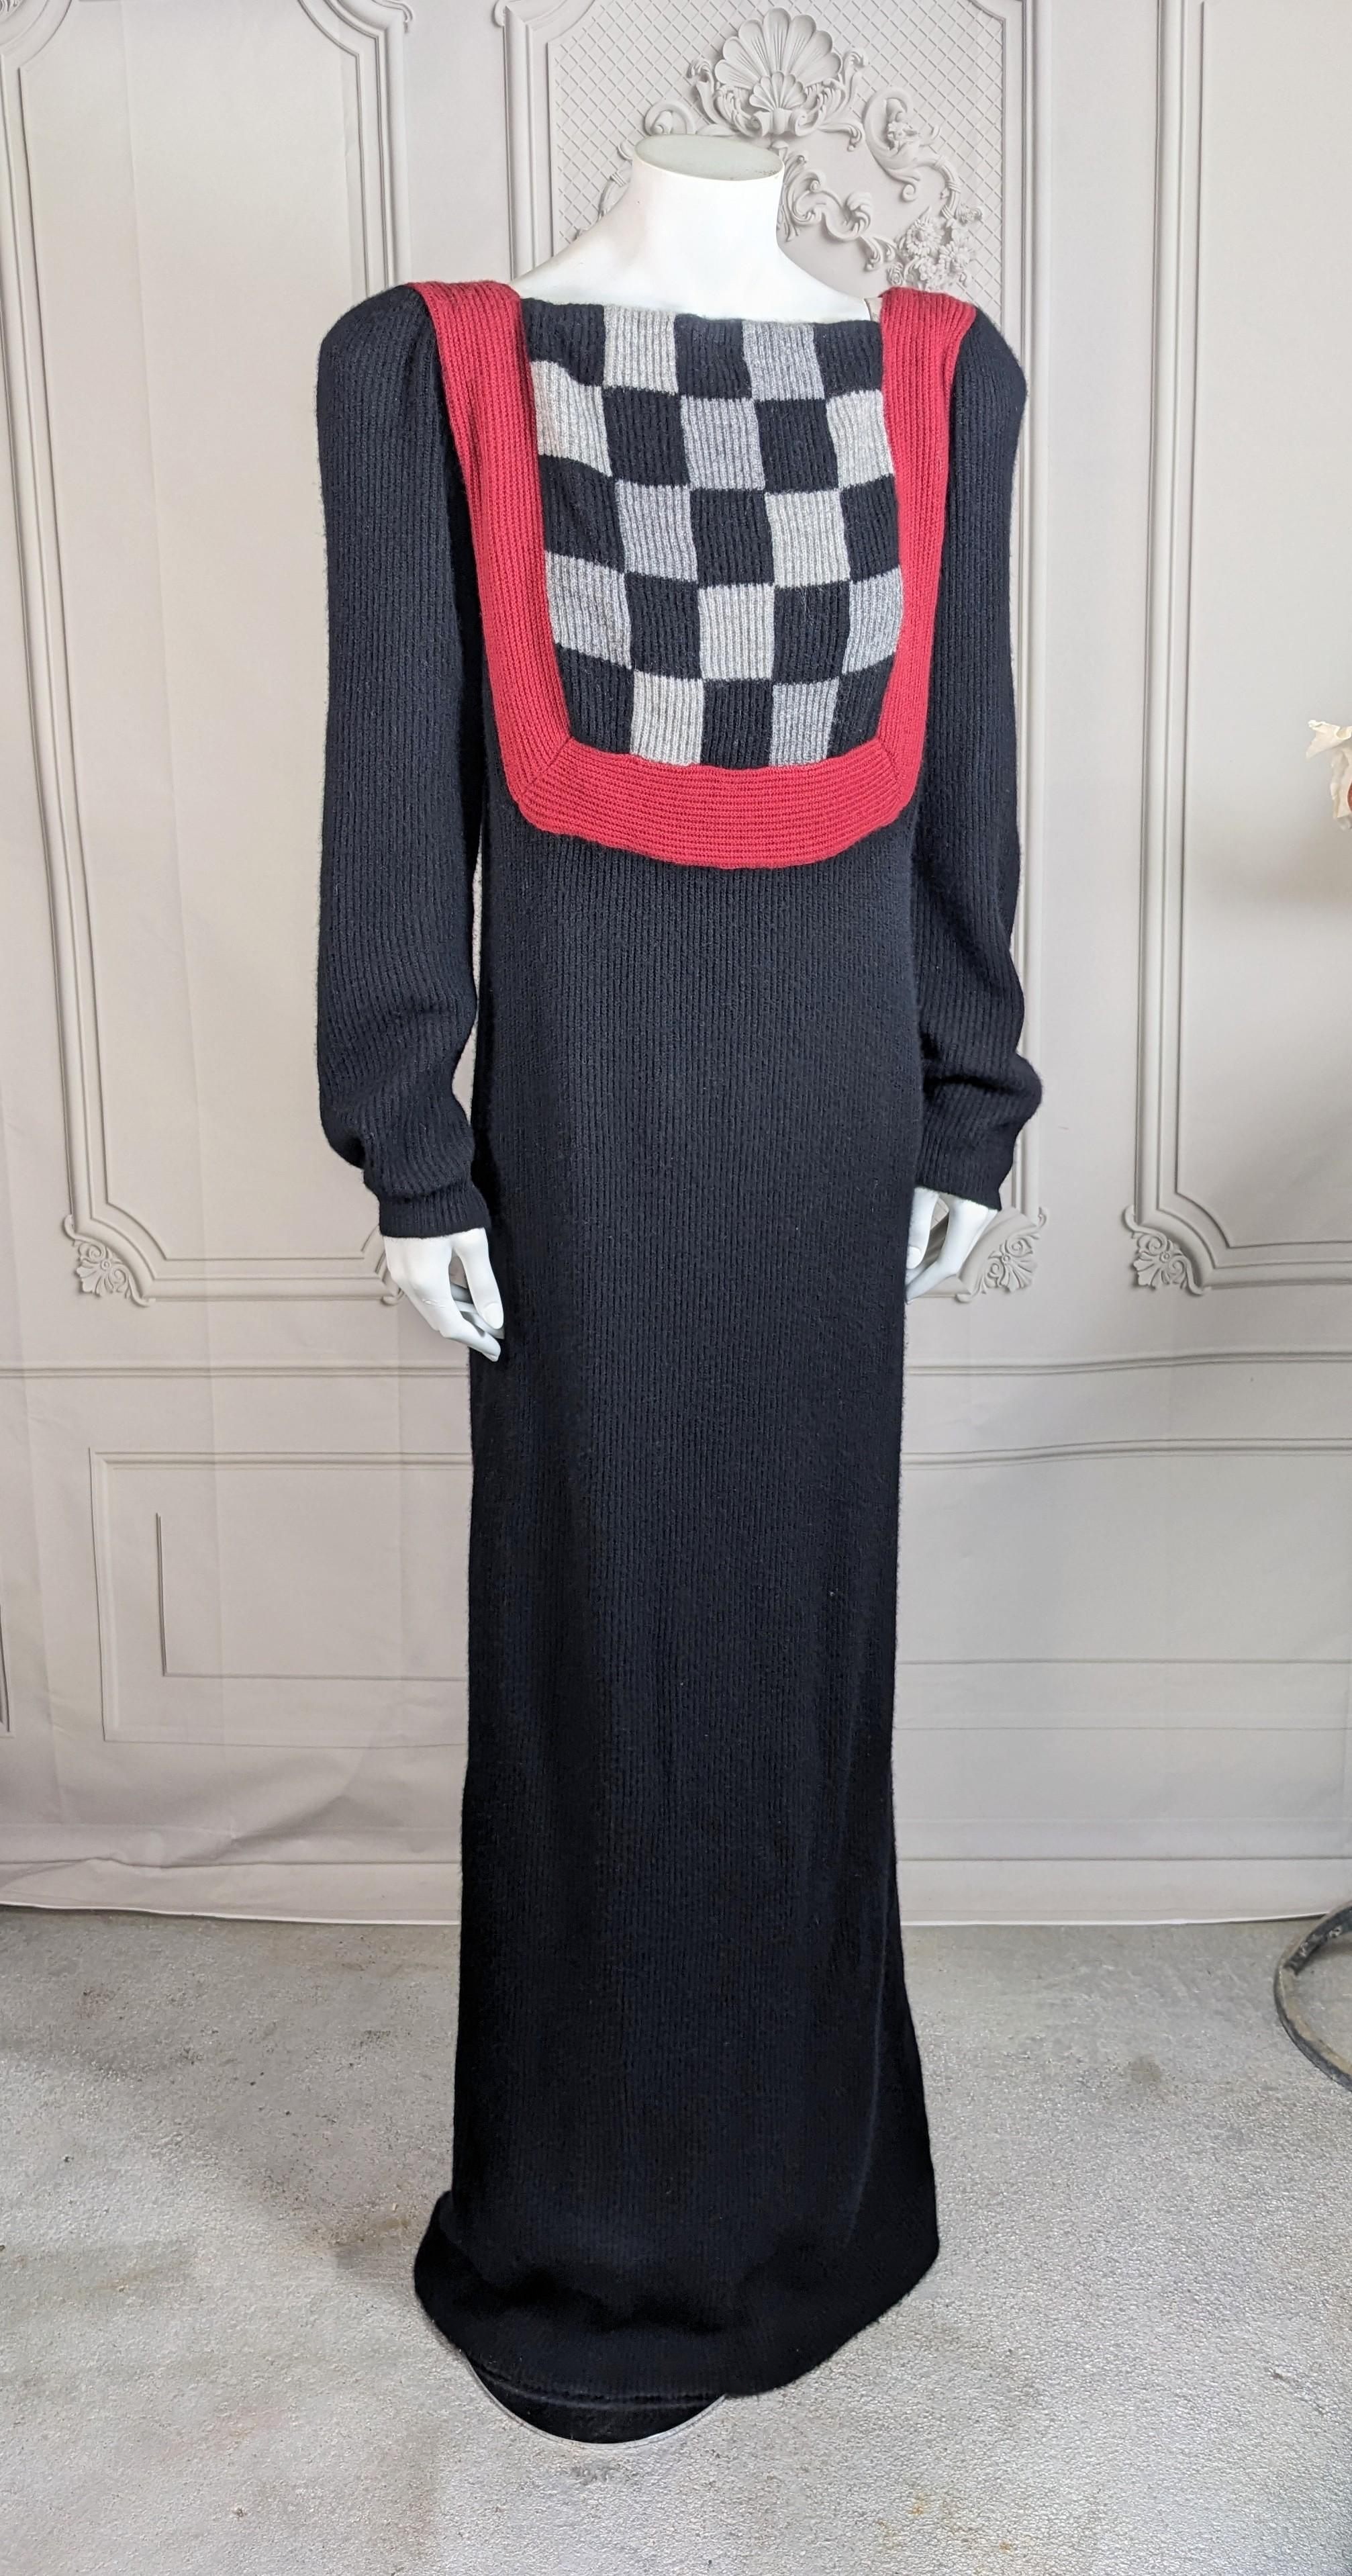 Bob Mackie Cashmere Knit Gown of ribbed knit from the 1990's. Long gown with strong shoulders. A checkerboard bib effect on front with ribbed rasberry knit trim which frames the bib and continues up the extended shoulders and around the back.